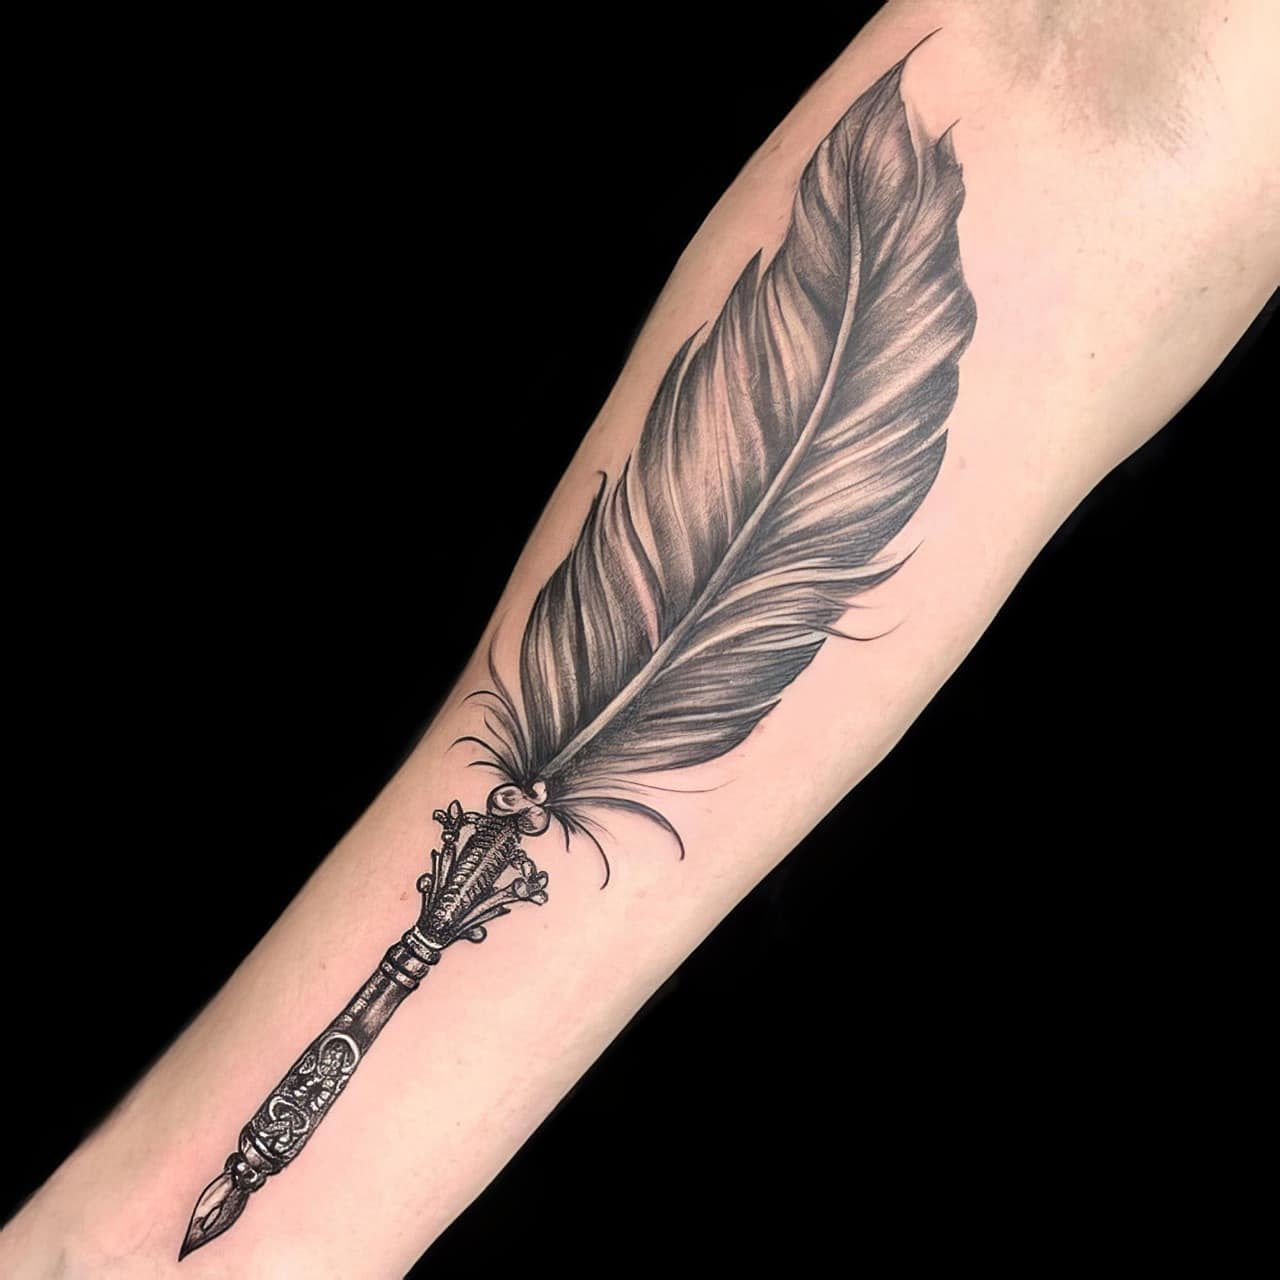 Cute feather tattoo on the forearm Inked by Black Poison Tattoos